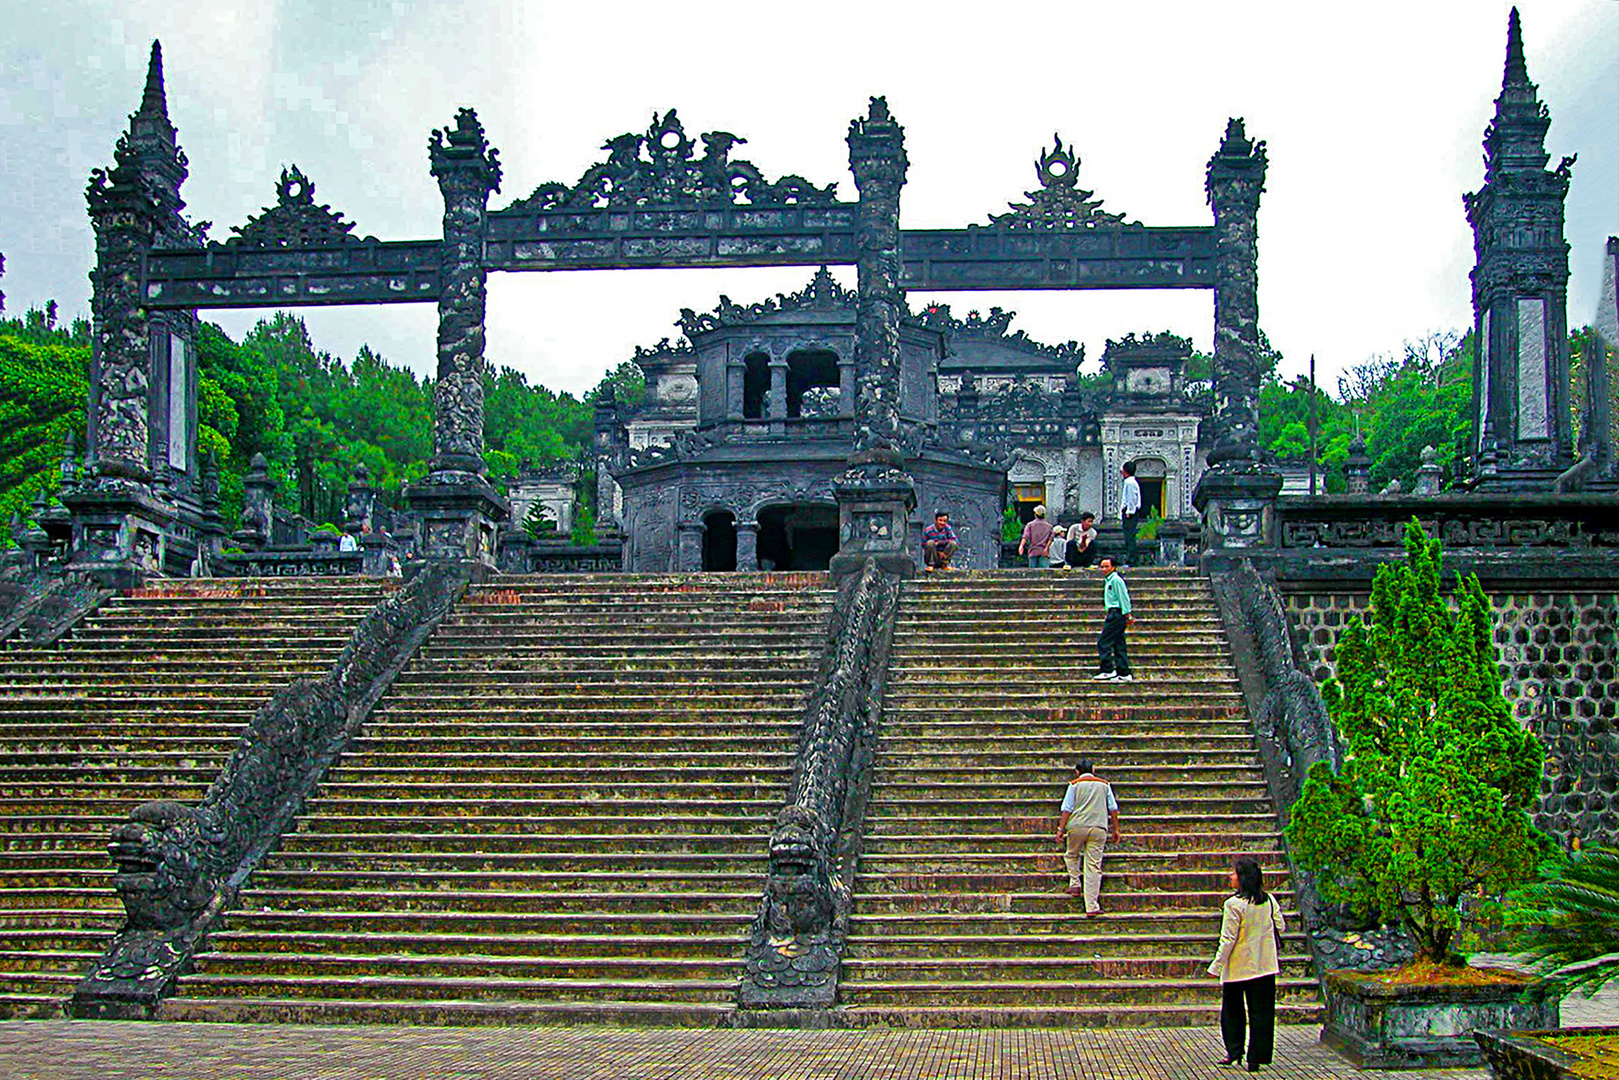 The stairs to Khai Dinh mausoleum